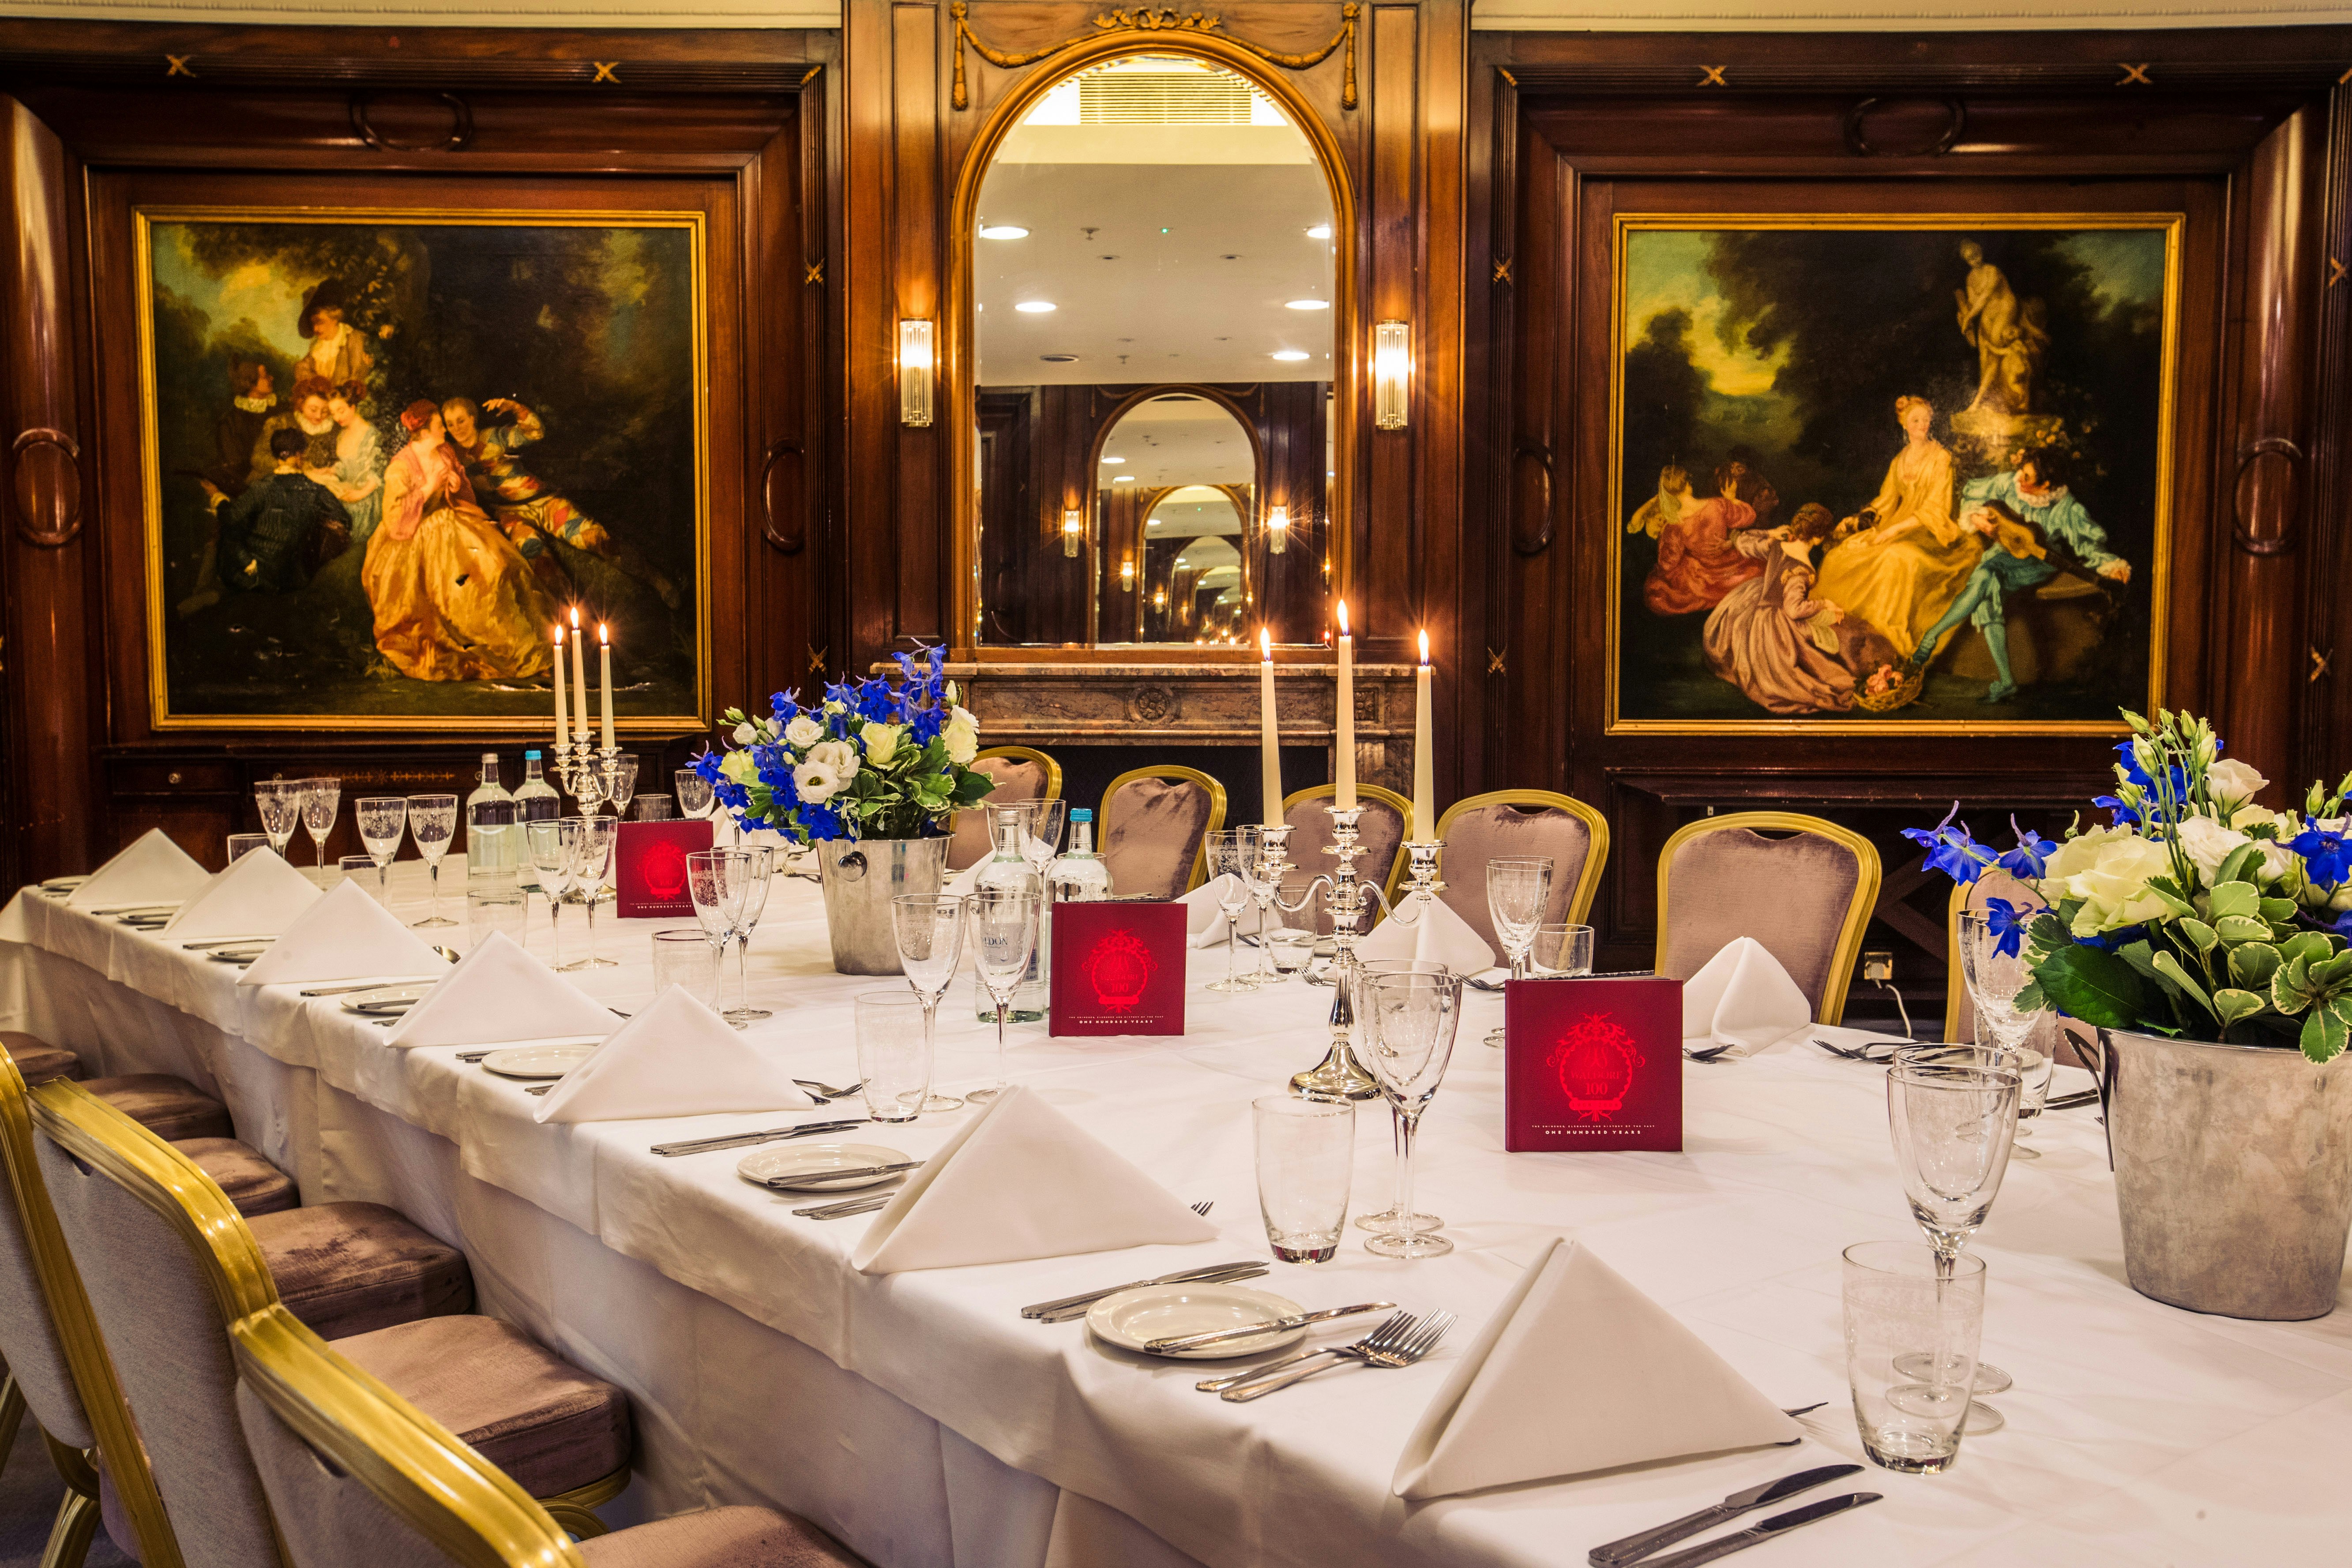 Private Dining Rooms Venues in Covent Garden - The Waldorf Hilton Hotel